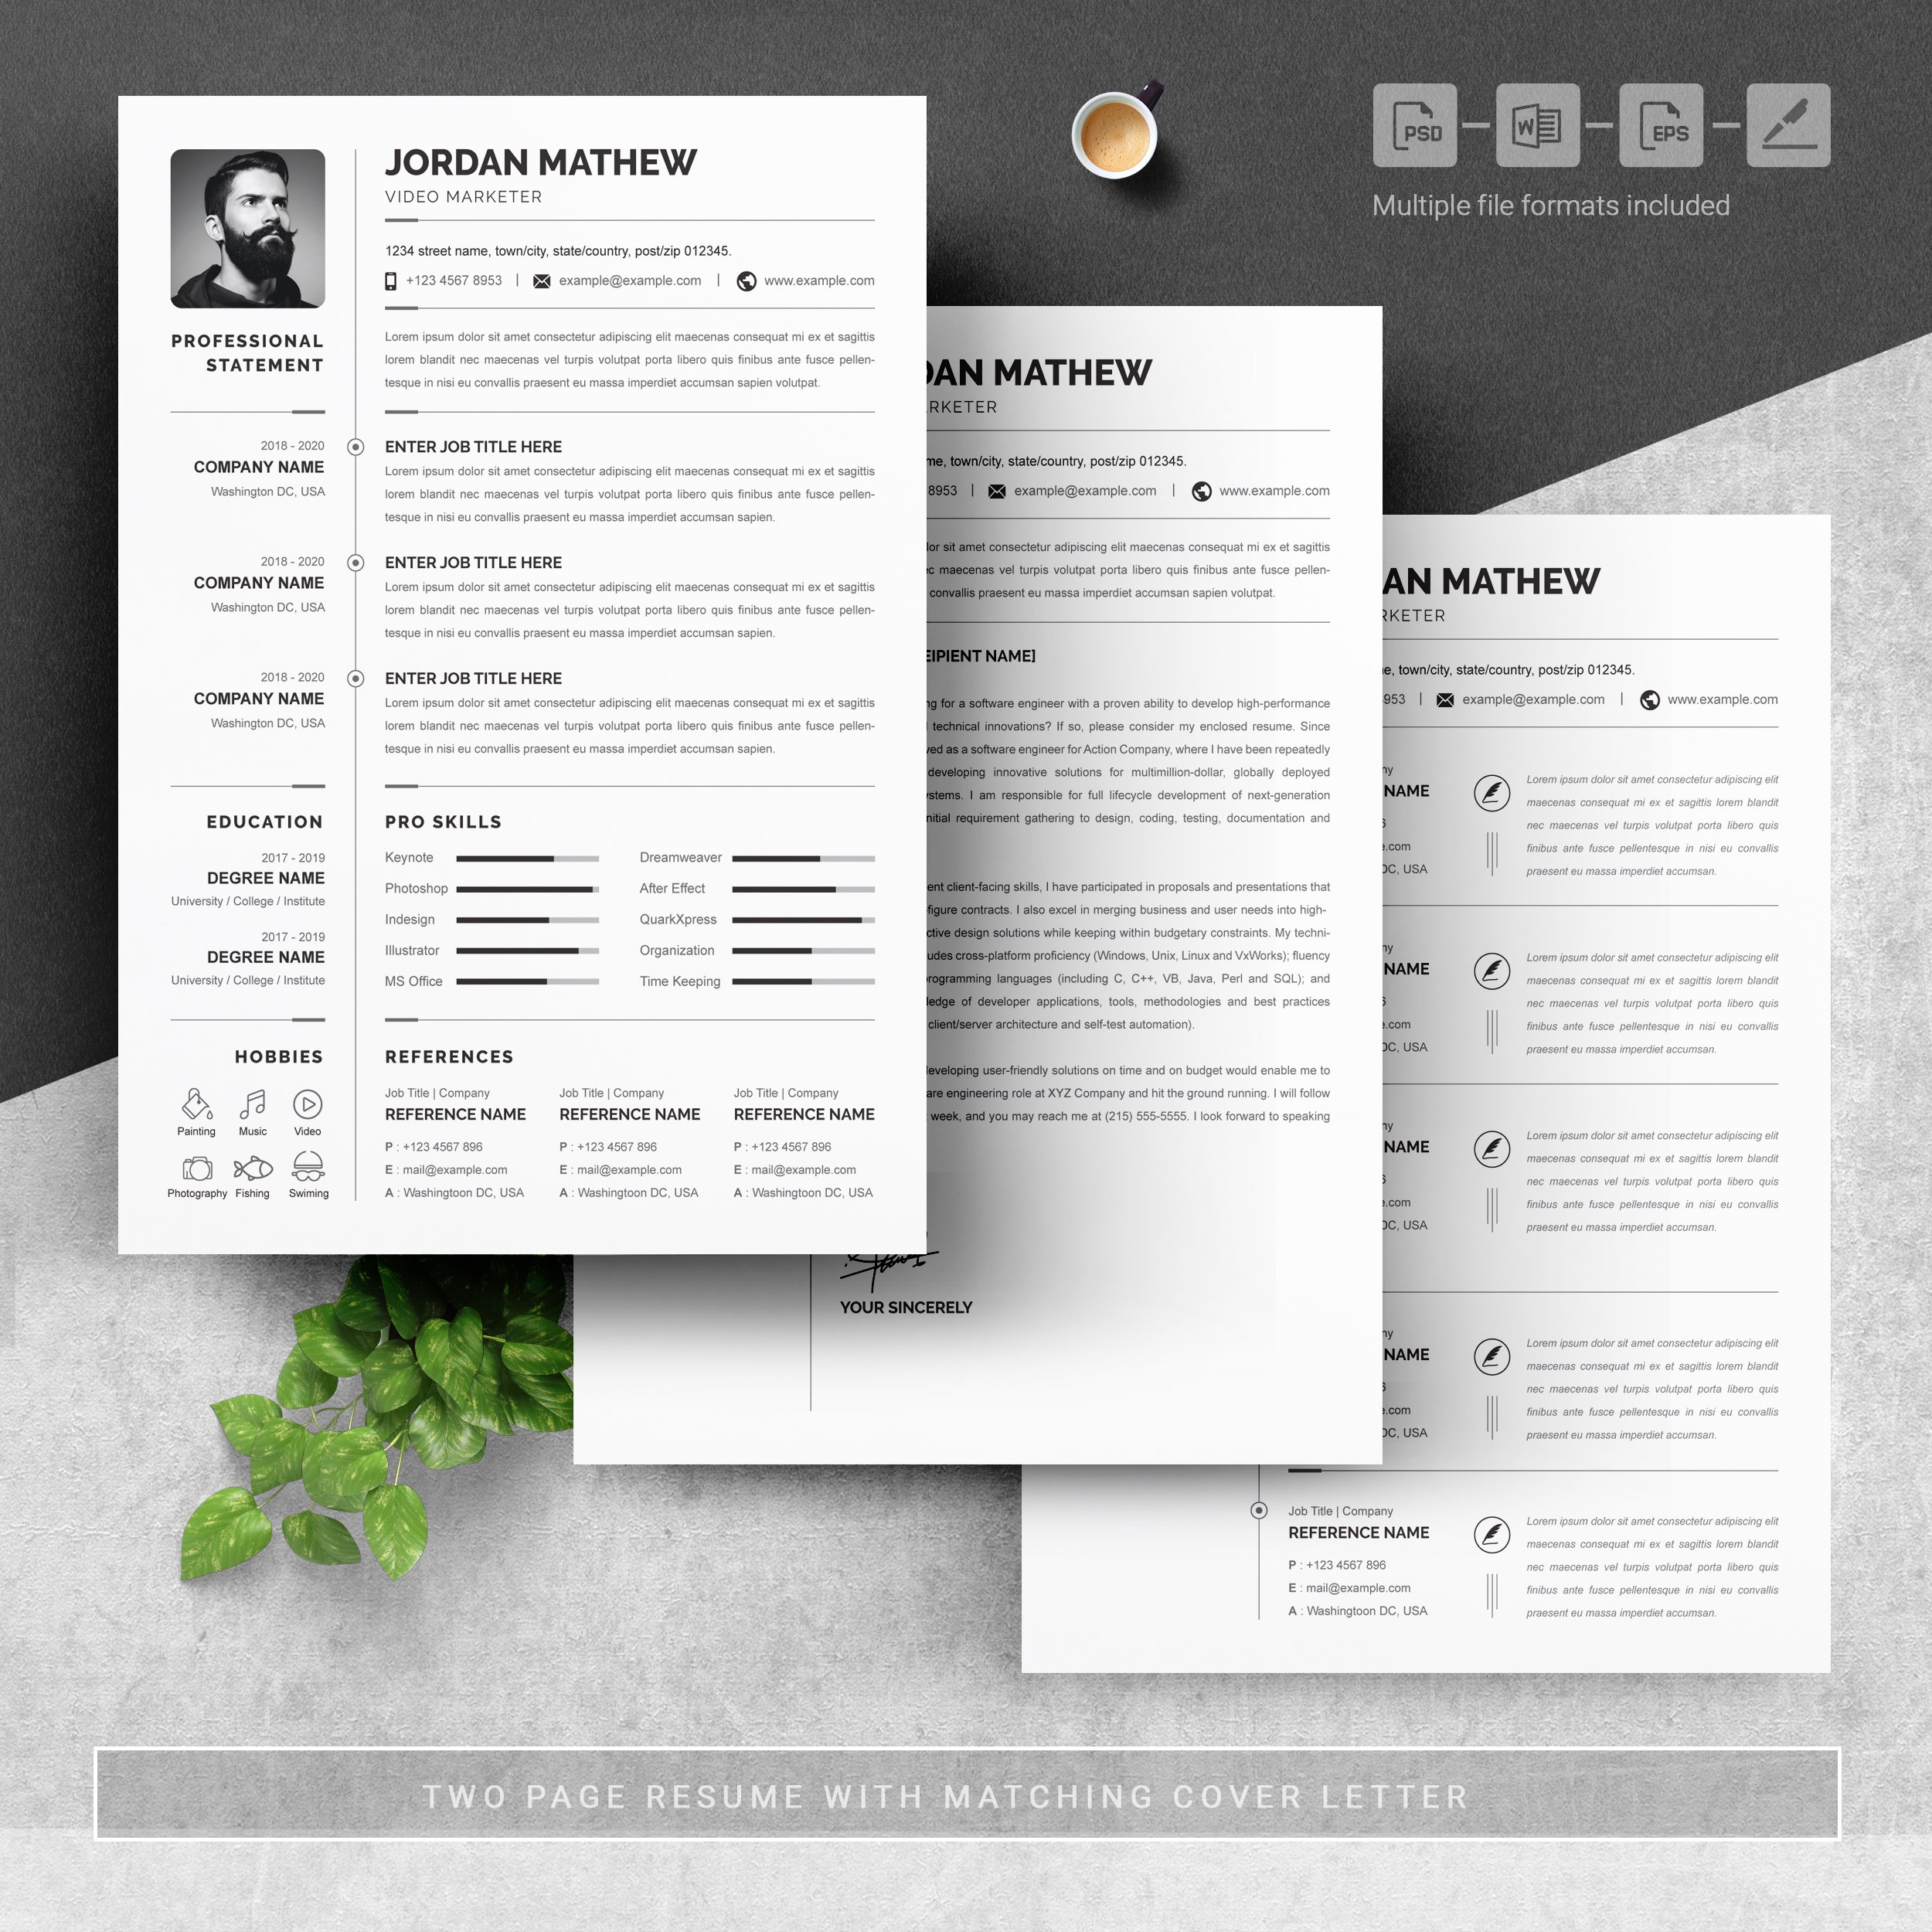 03 3 pages free resume design template 199